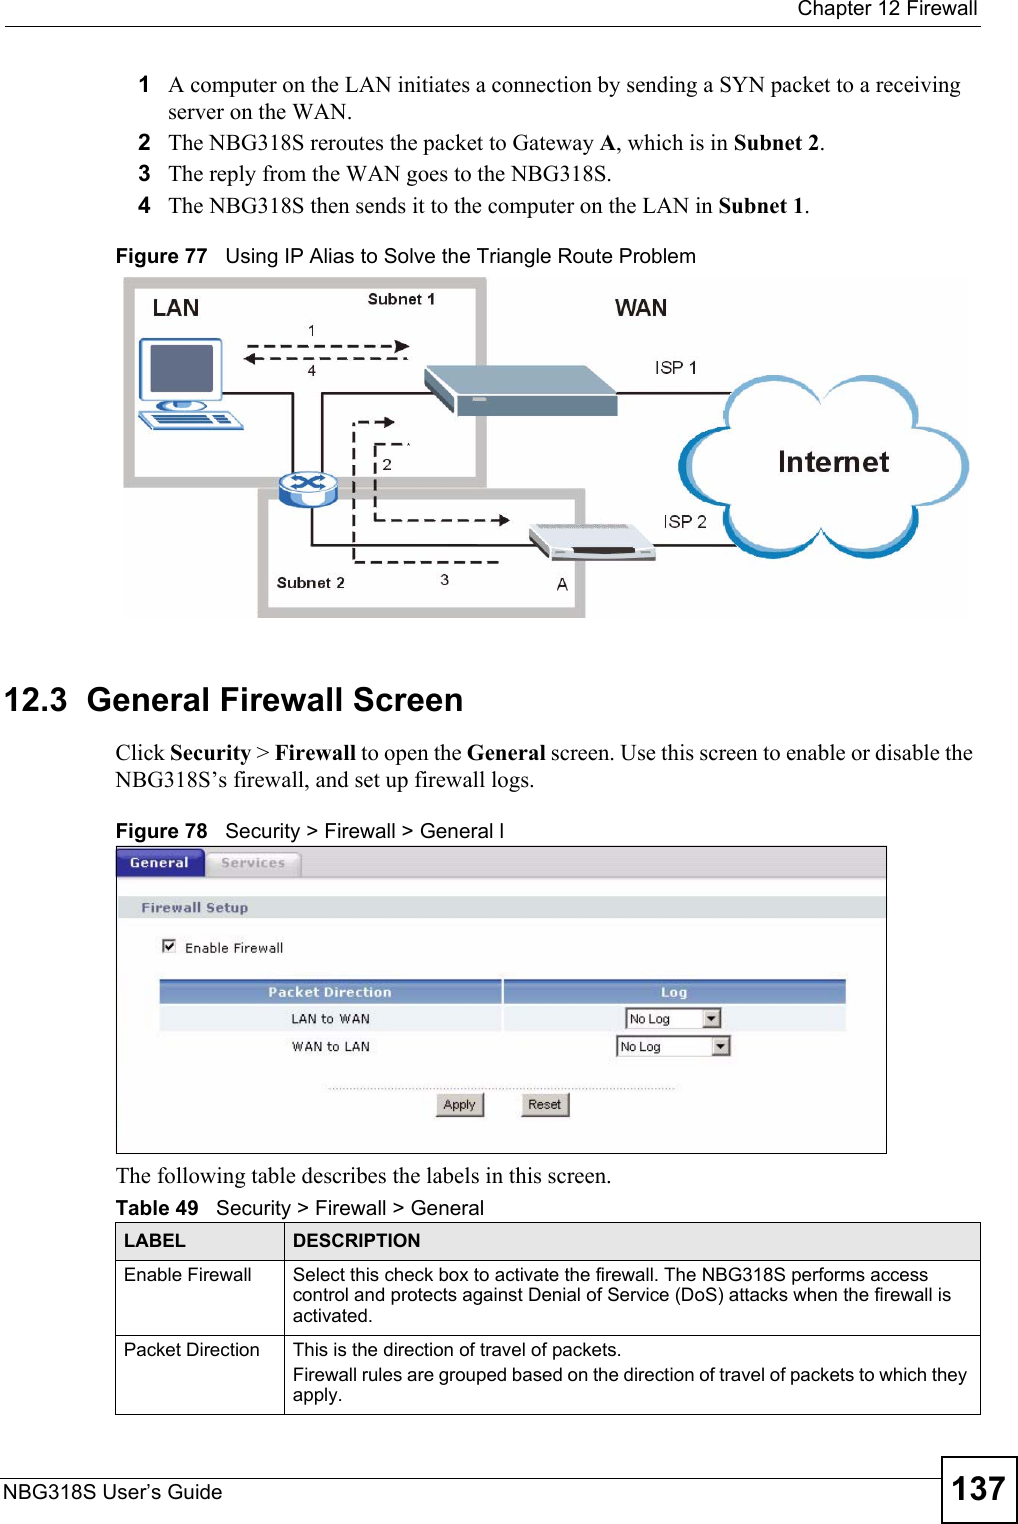  Chapter 12 FirewallNBG318S User’s Guide 1371A computer on the LAN initiates a connection by sending a SYN packet to a receiving server on the WAN.2The NBG318S reroutes the packet to Gateway A, which is in Subnet 2. 3The reply from the WAN goes to the NBG318S. 4The NBG318S then sends it to the computer on the LAN in Subnet 1. Figure 77   Using IP Alias to Solve the Triangle Route Problem12.3  General Firewall Screen   Click Security &gt; Firewall to open the General screen. Use this screen to enable or disable the NBG318S’s firewall, and set up firewall logs. Figure 78   Security &gt; Firewall &gt; General lThe following table describes the labels in this screen.Table 49   Security &gt; Firewall &gt; General LABEL DESCRIPTIONEnable Firewall Select this check box to activate the firewall. The NBG318S performs access control and protects against Denial of Service (DoS) attacks when the firewall is activated.Packet Direction This is the direction of travel of packets.Firewall rules are grouped based on the direction of travel of packets to which they apply. 